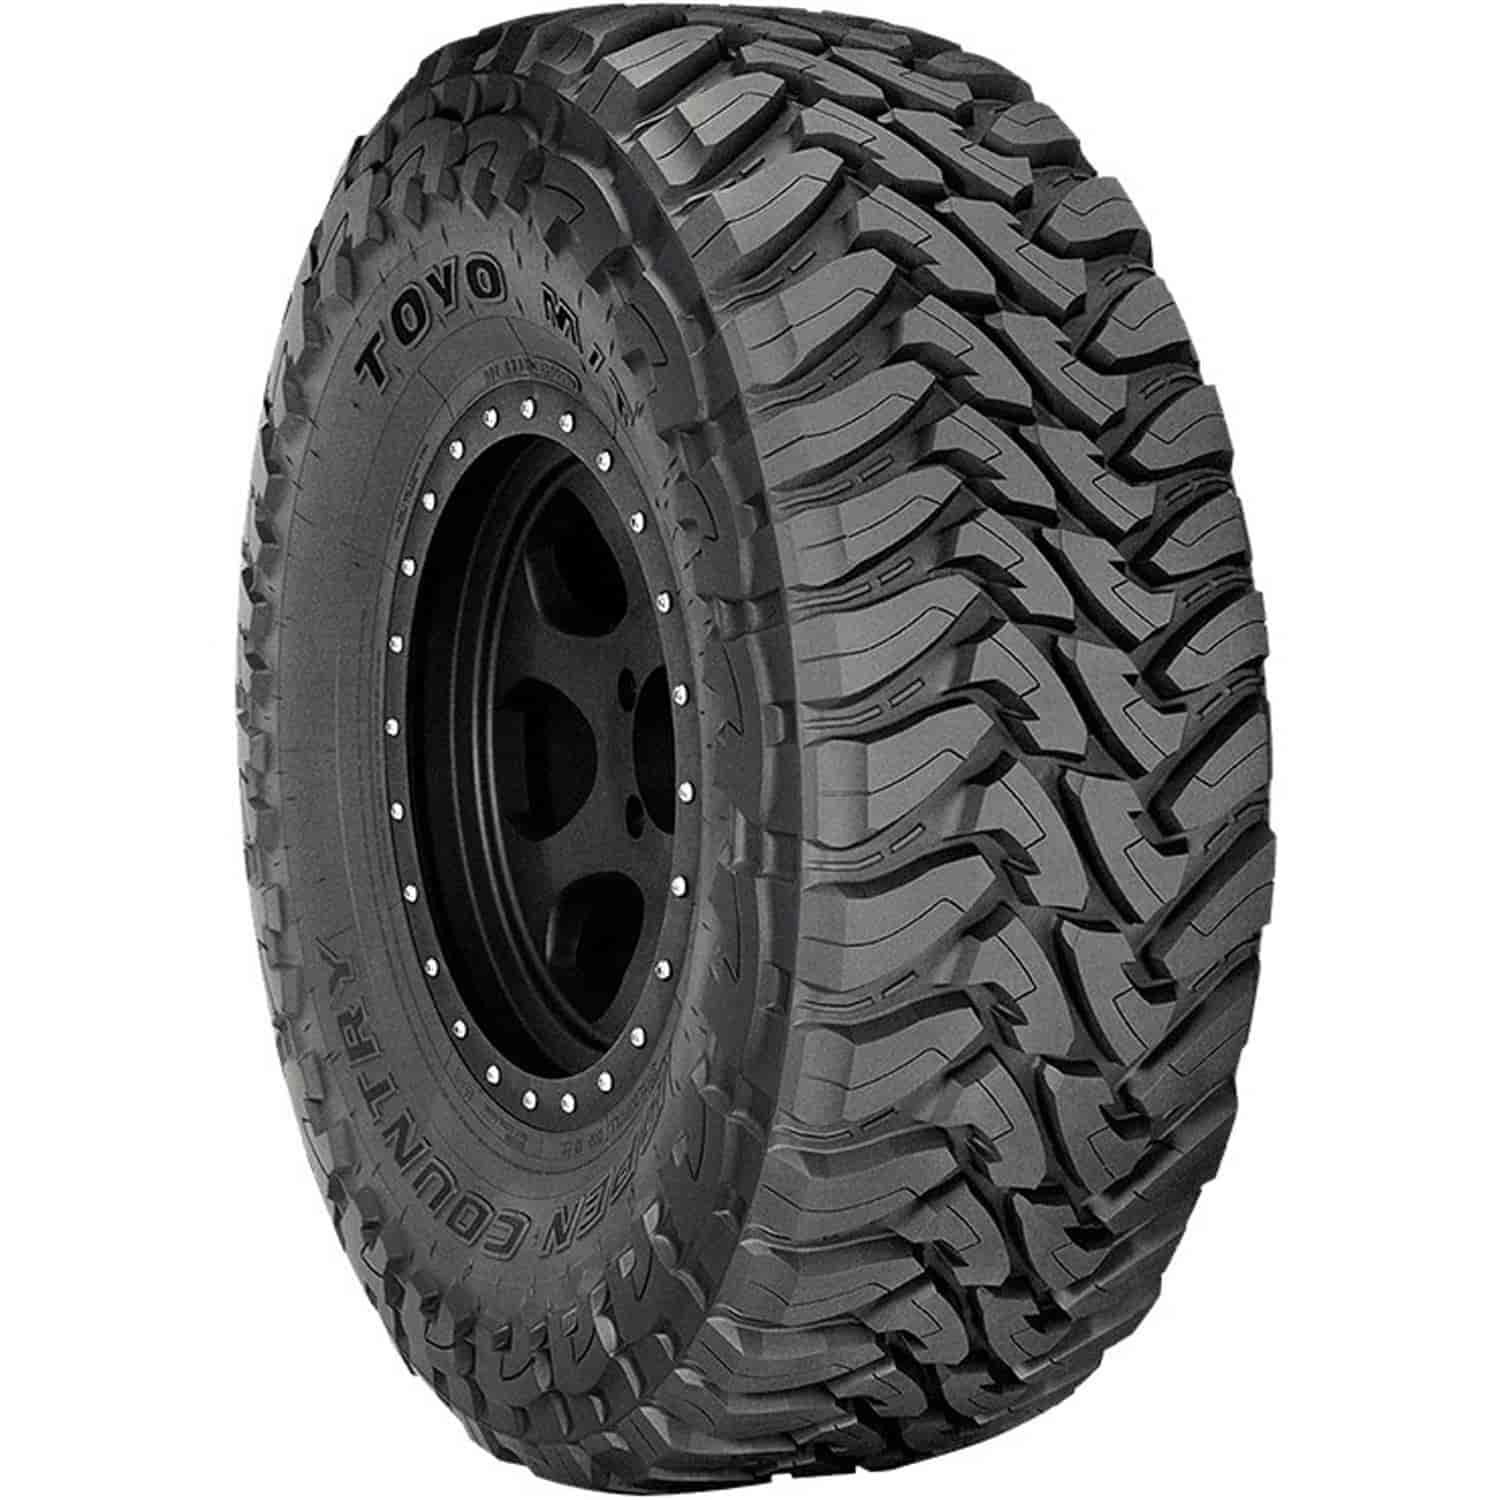 Open Country M/T LT315/60R20 125/122Q E/10 35X12.50R20